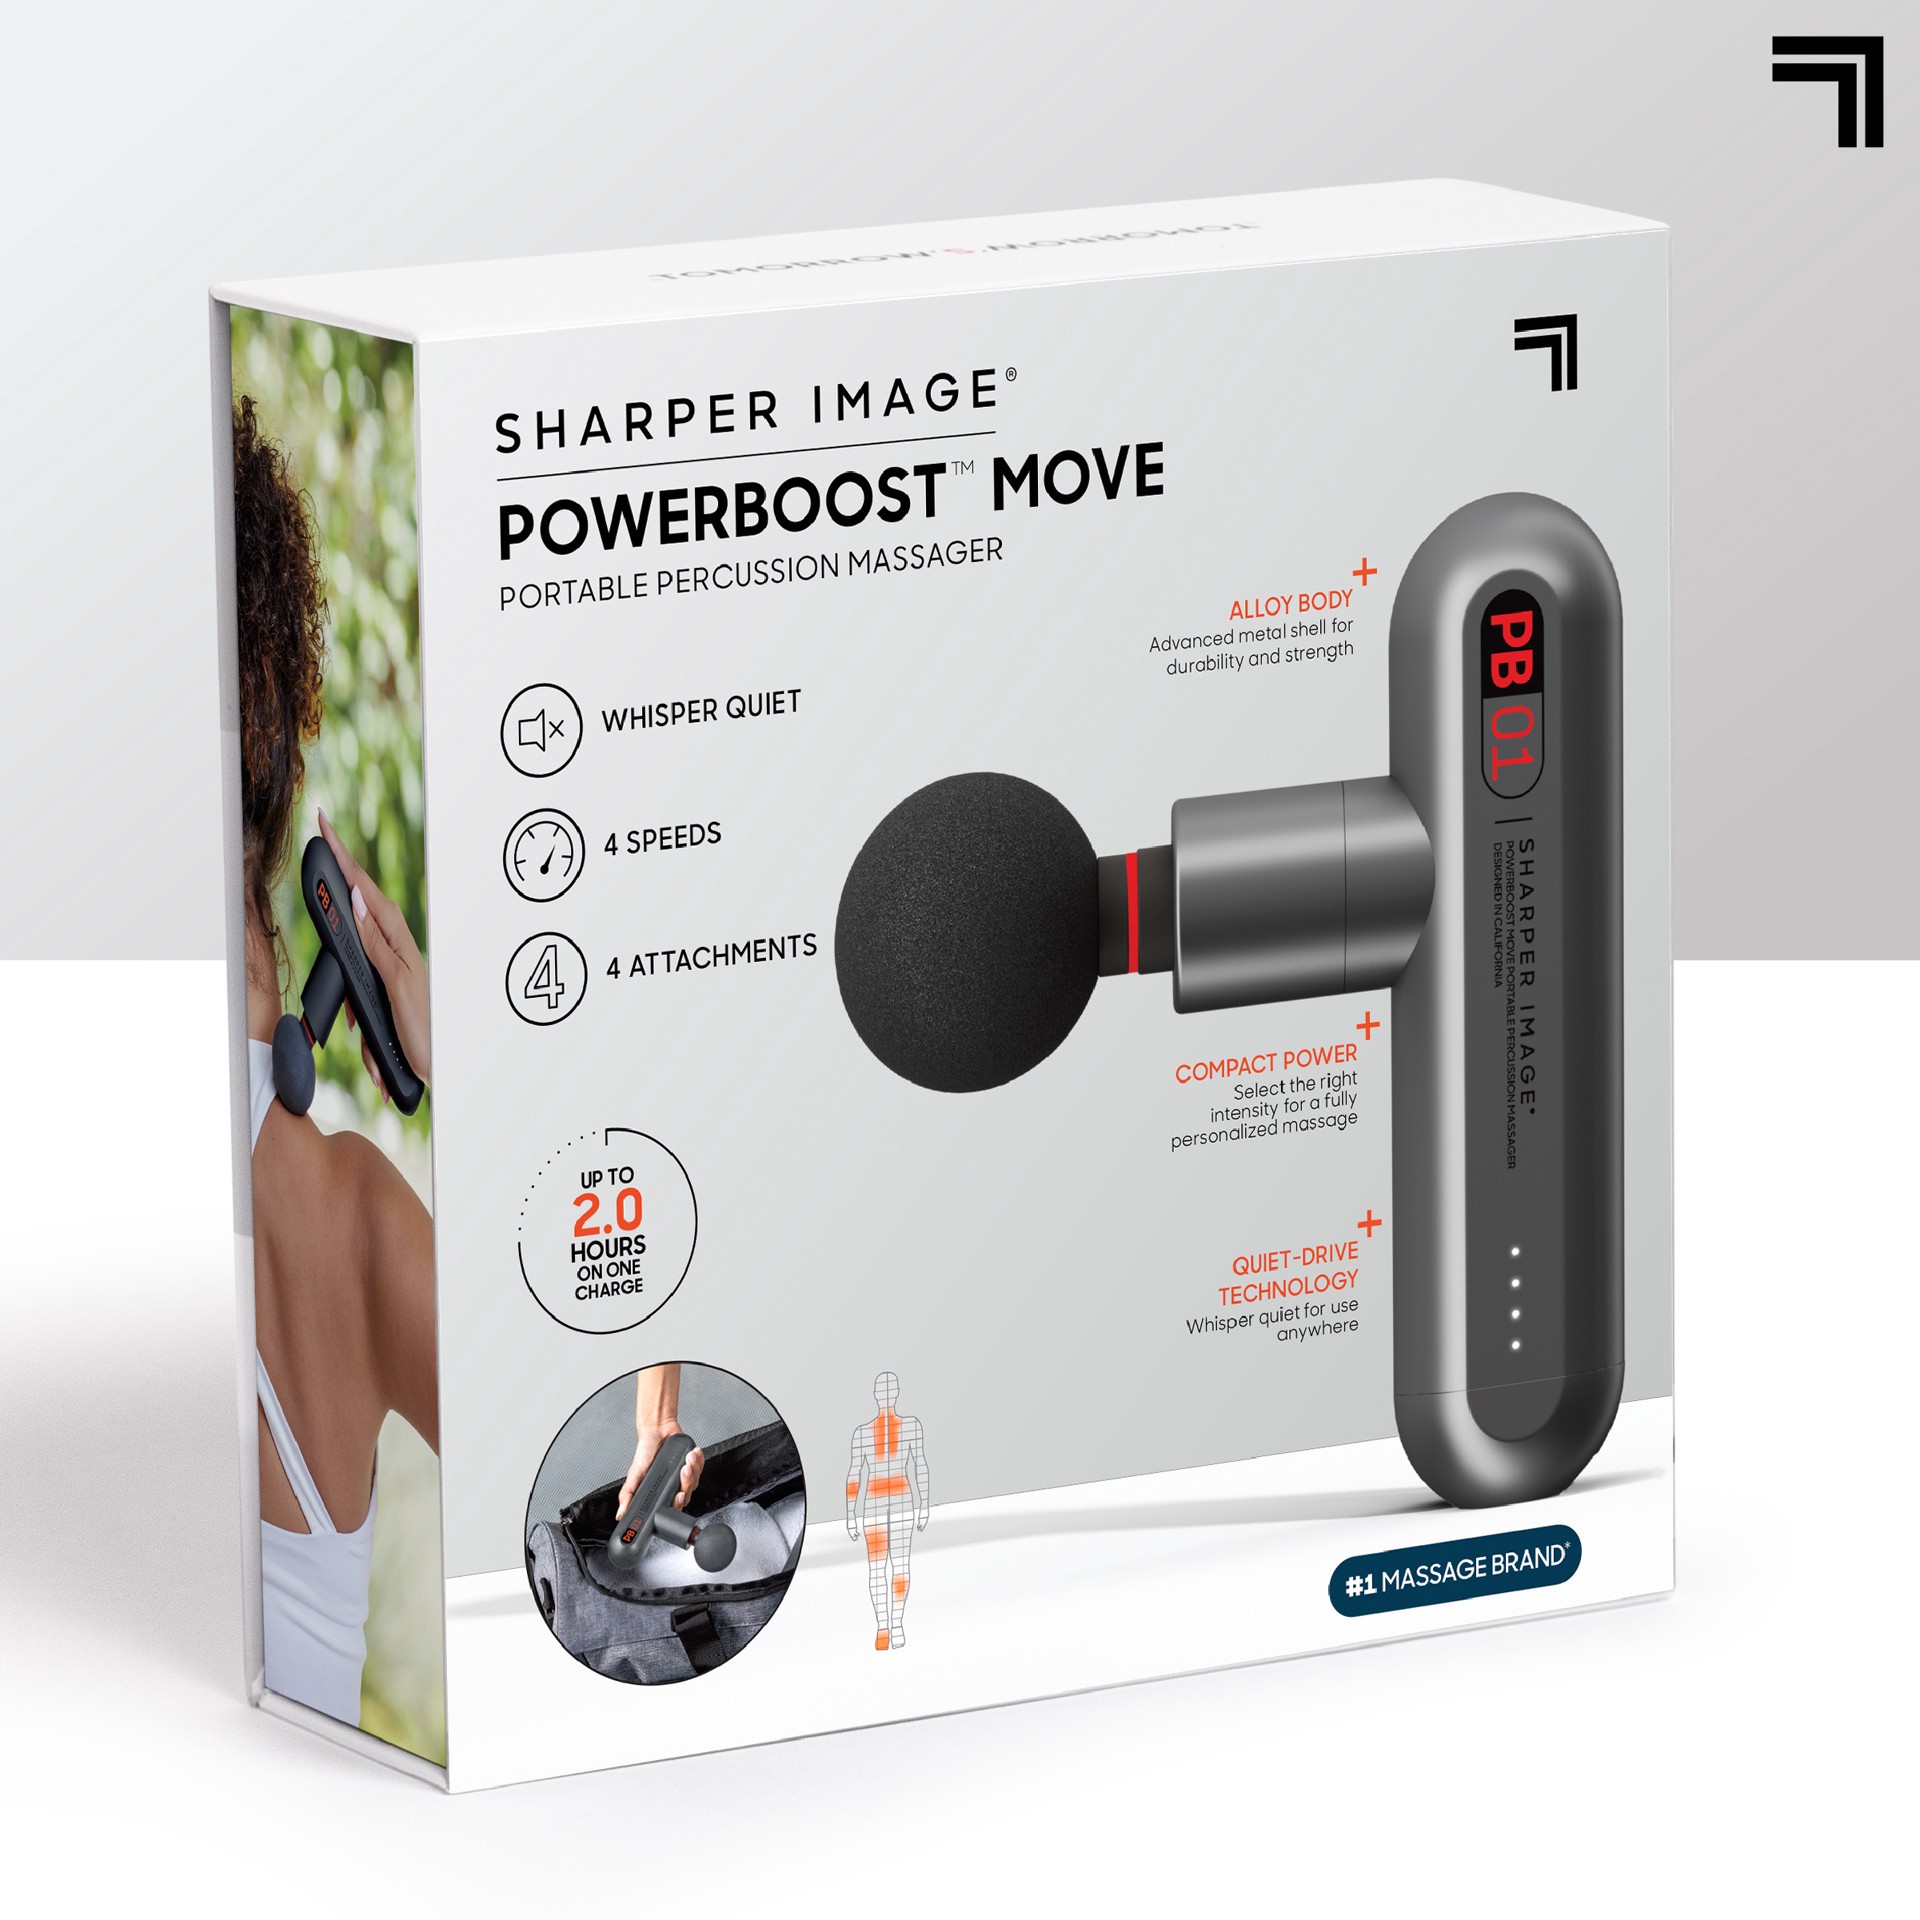 slide 5 of 10, Sharper Image Powerboost Move Portable Percussion Massager, 1 ct